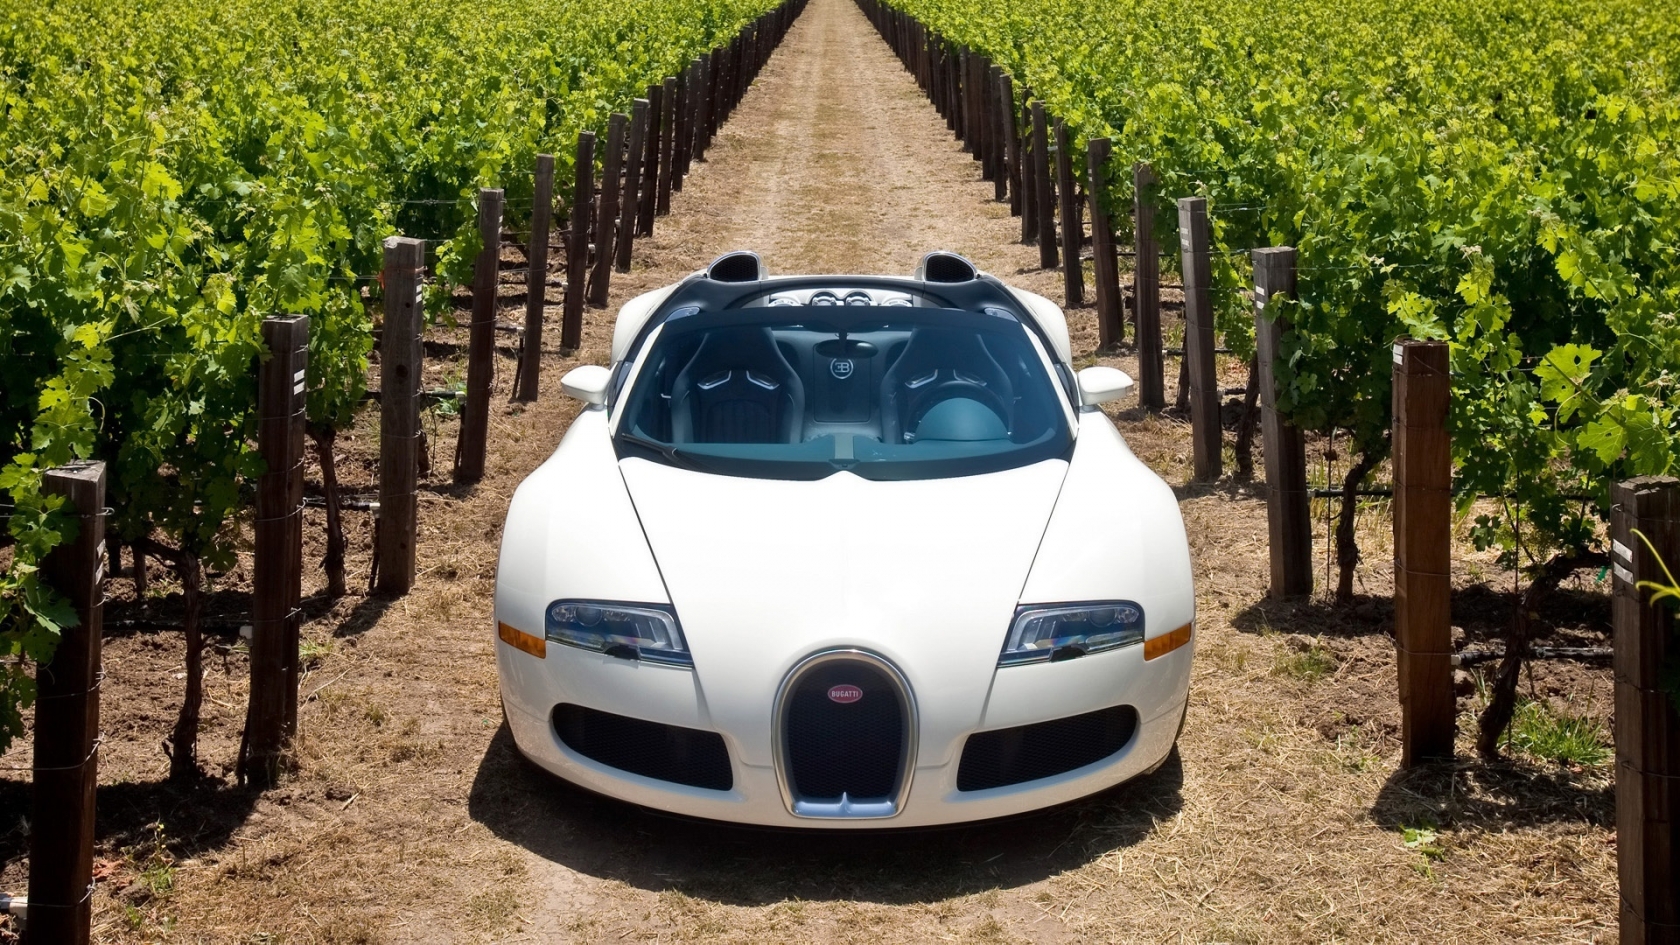 Bugatti Veyron 16.4 Grand Sport 2010 in Napa Valley - Front 2 for 1680 x 945 HDTV resolution